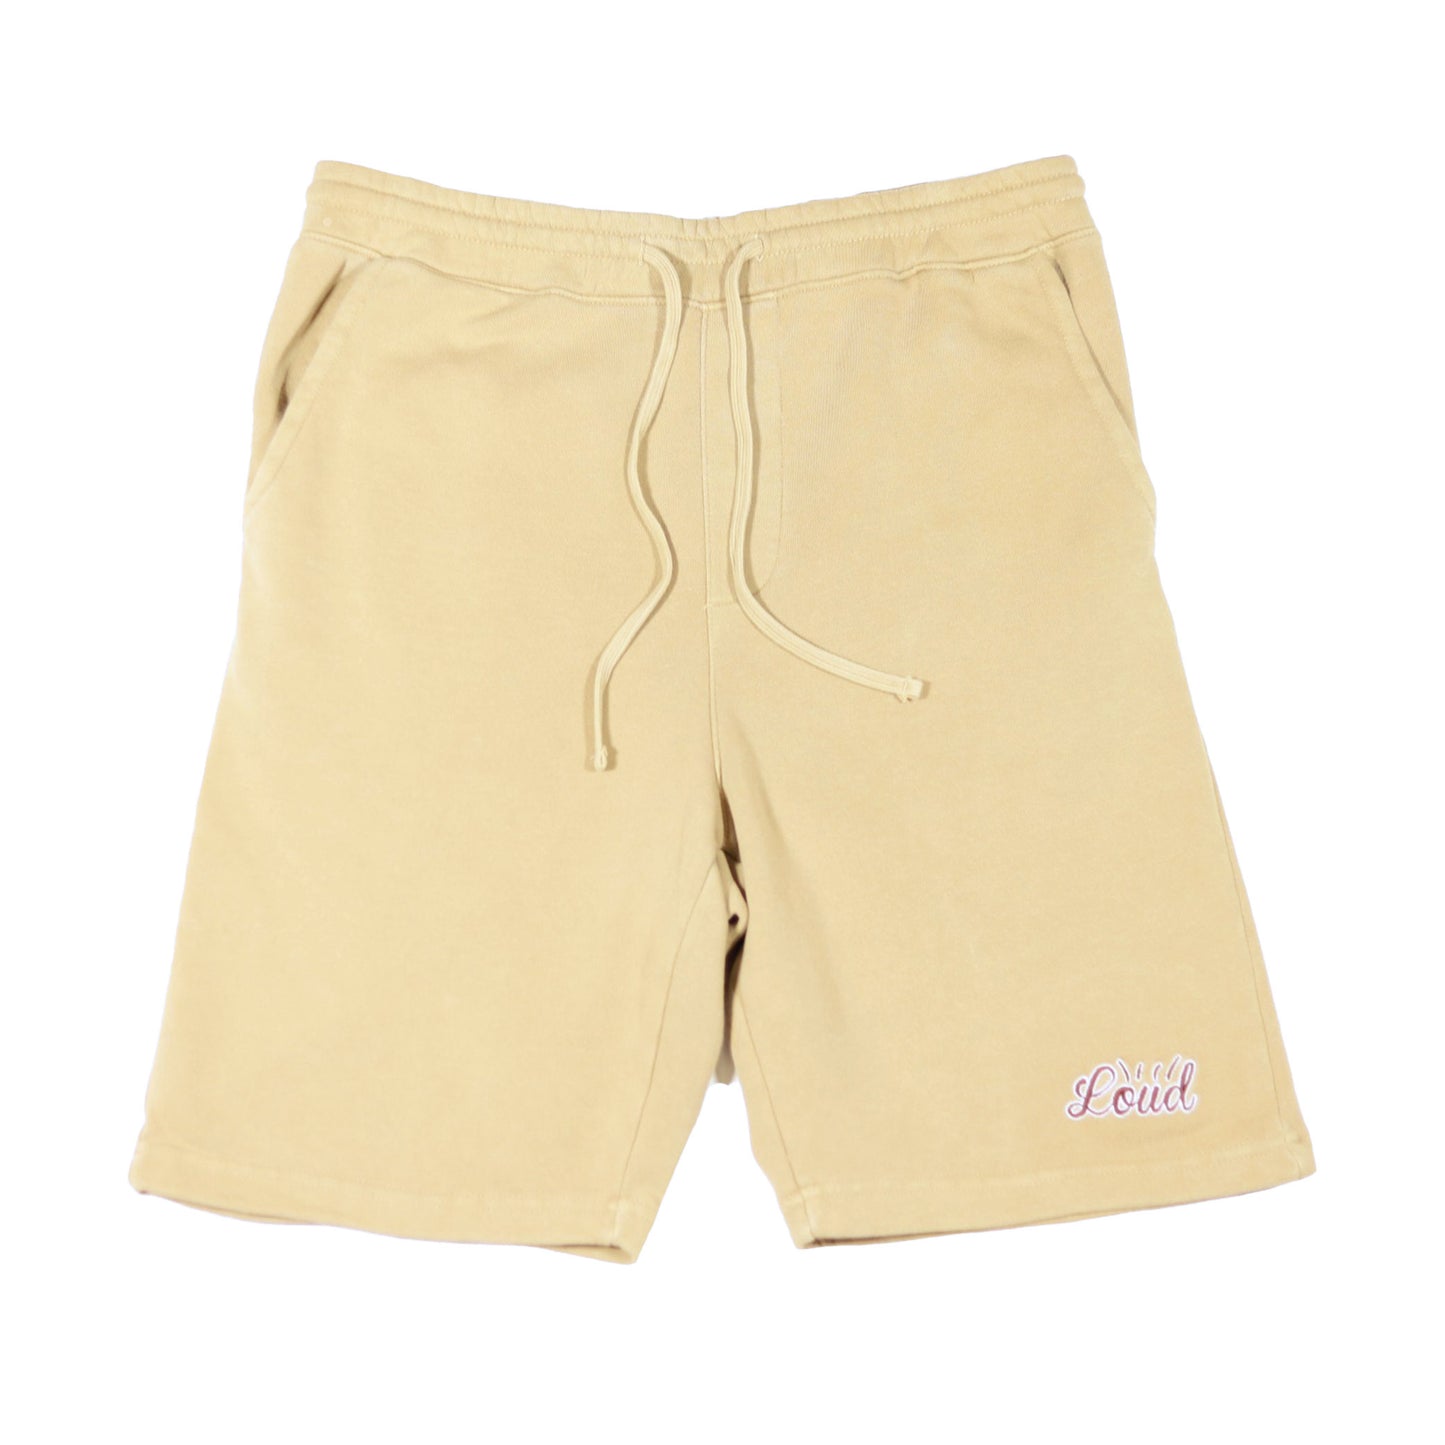 Loud v.2 Pigment Dyed Shorts - Sand/Brown